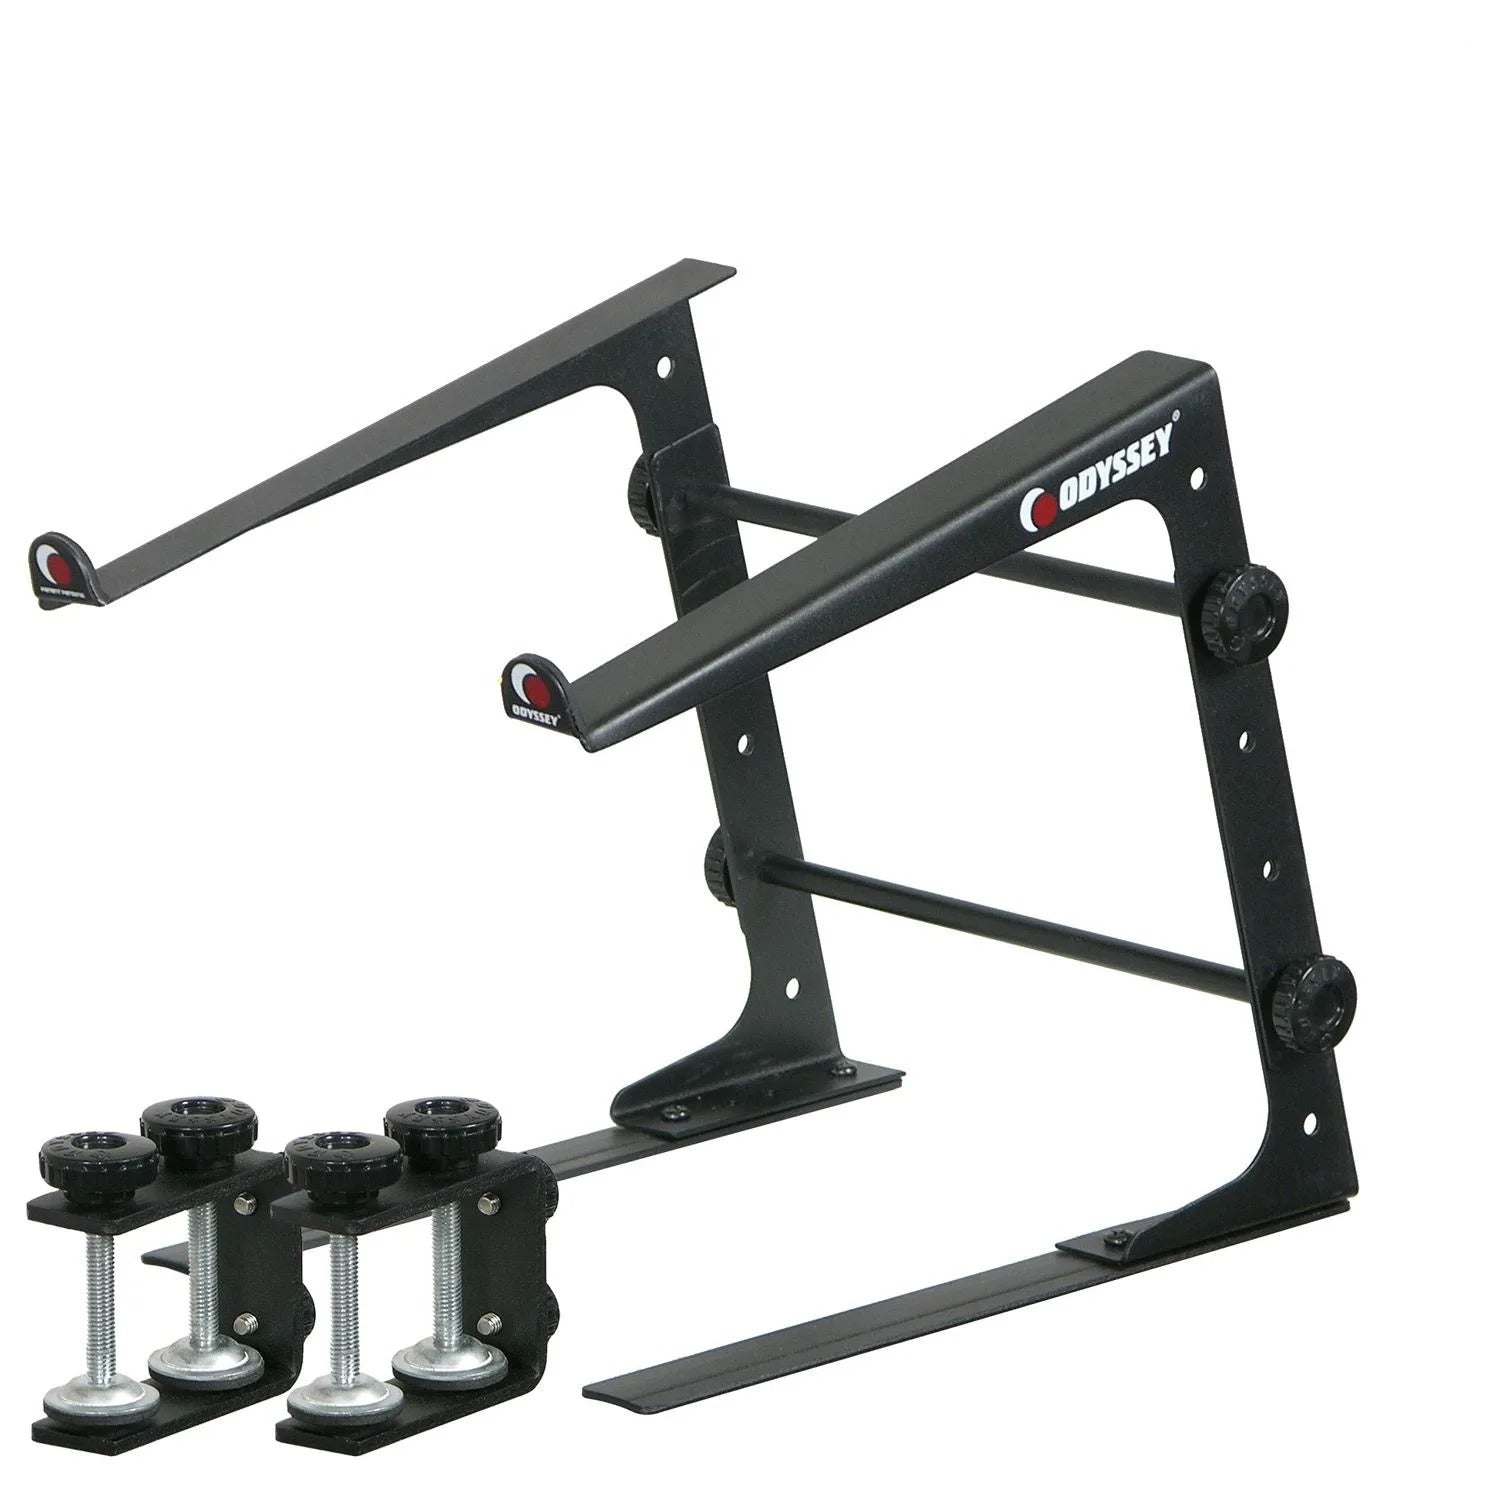 B-Stock: Odyssey LSTAND, DJ Table Top Laptop Stand with Clamps - Black - Hollywood DJ